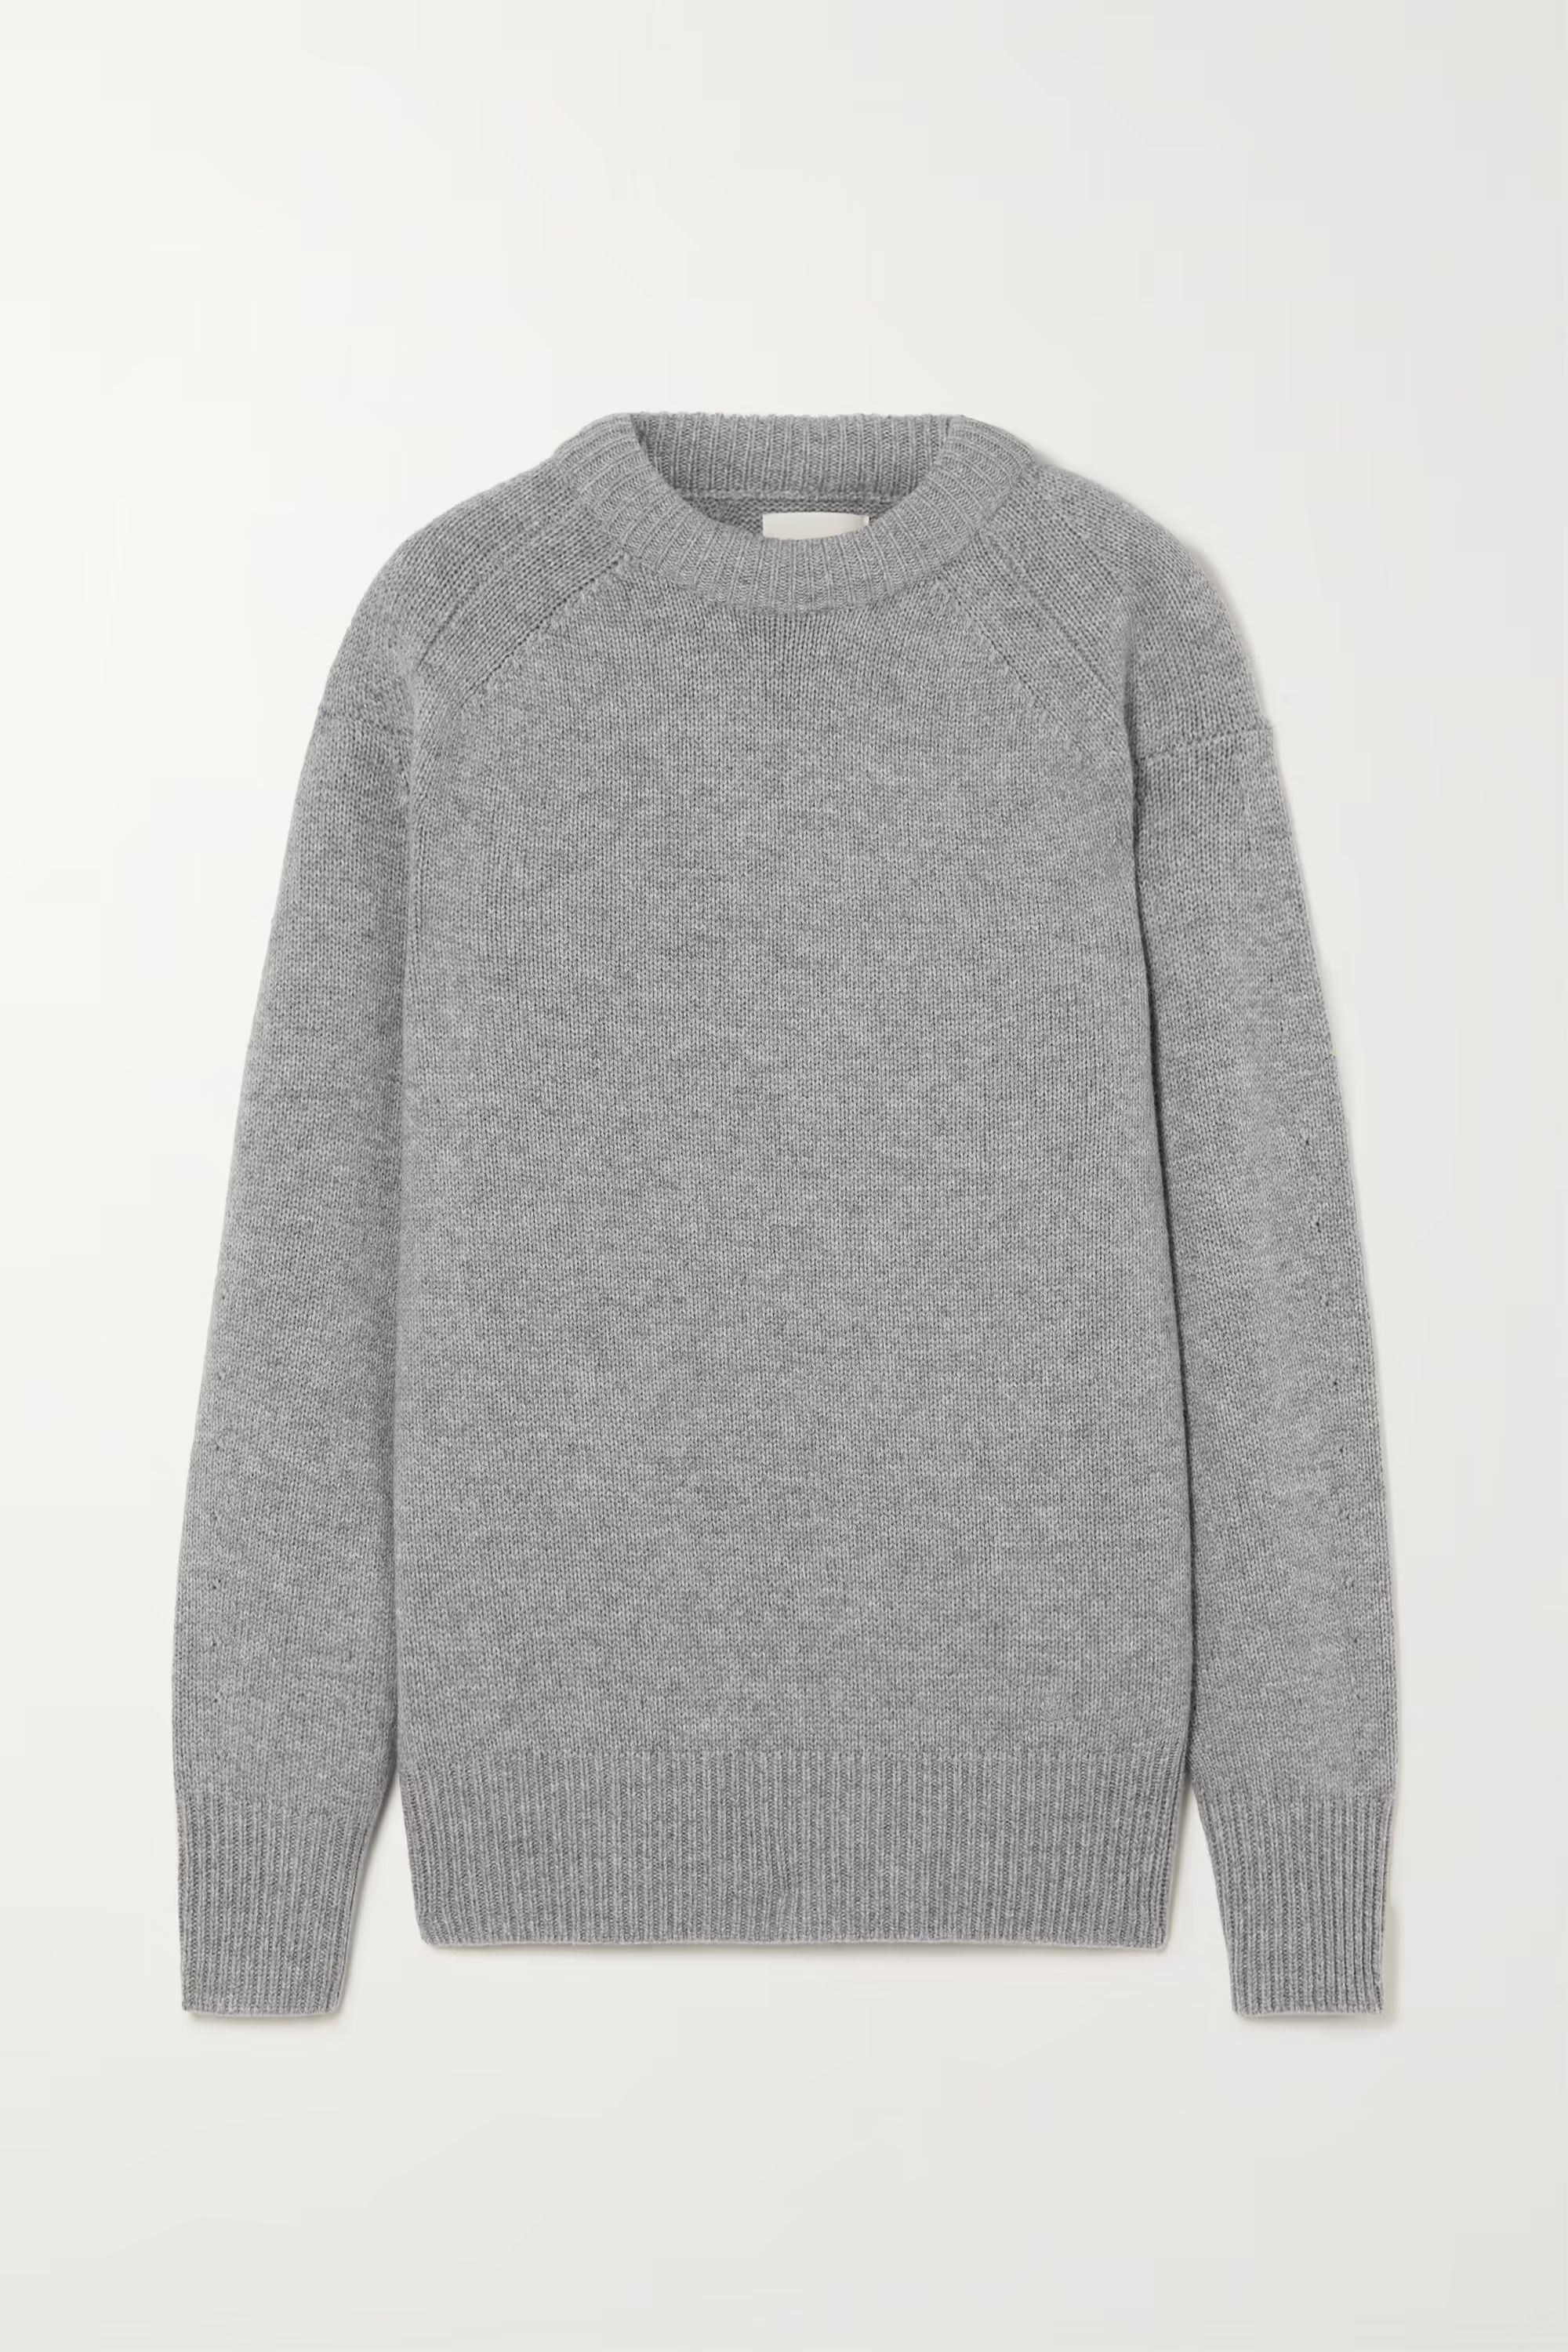 LOULOU STUDIORatino wool and cashmere-blend sweater | NET-A-PORTER (US)